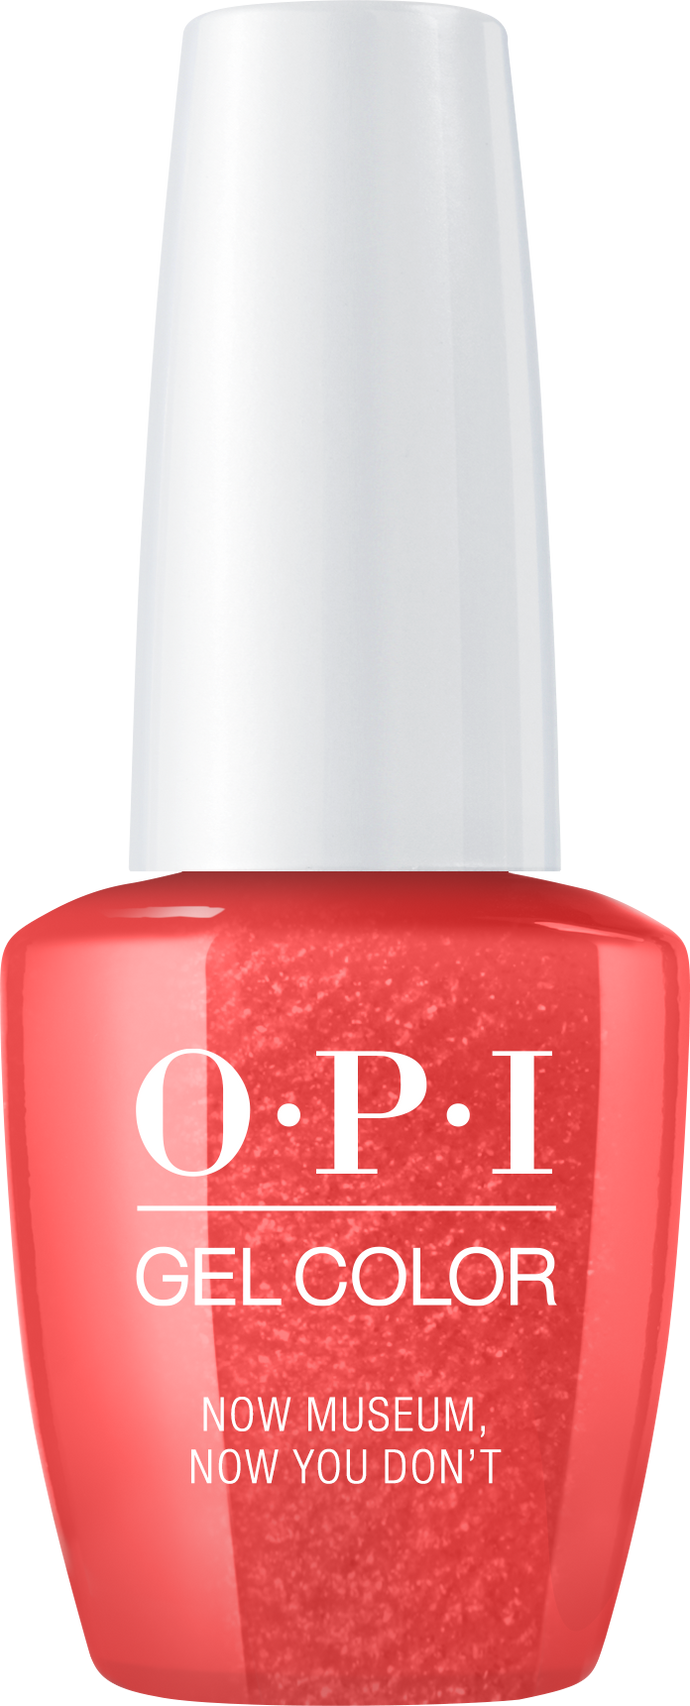 OPI OPI GelColor - Now Museum, Now You Dont 0.5 oz - #GCL21 - Sleek Nail